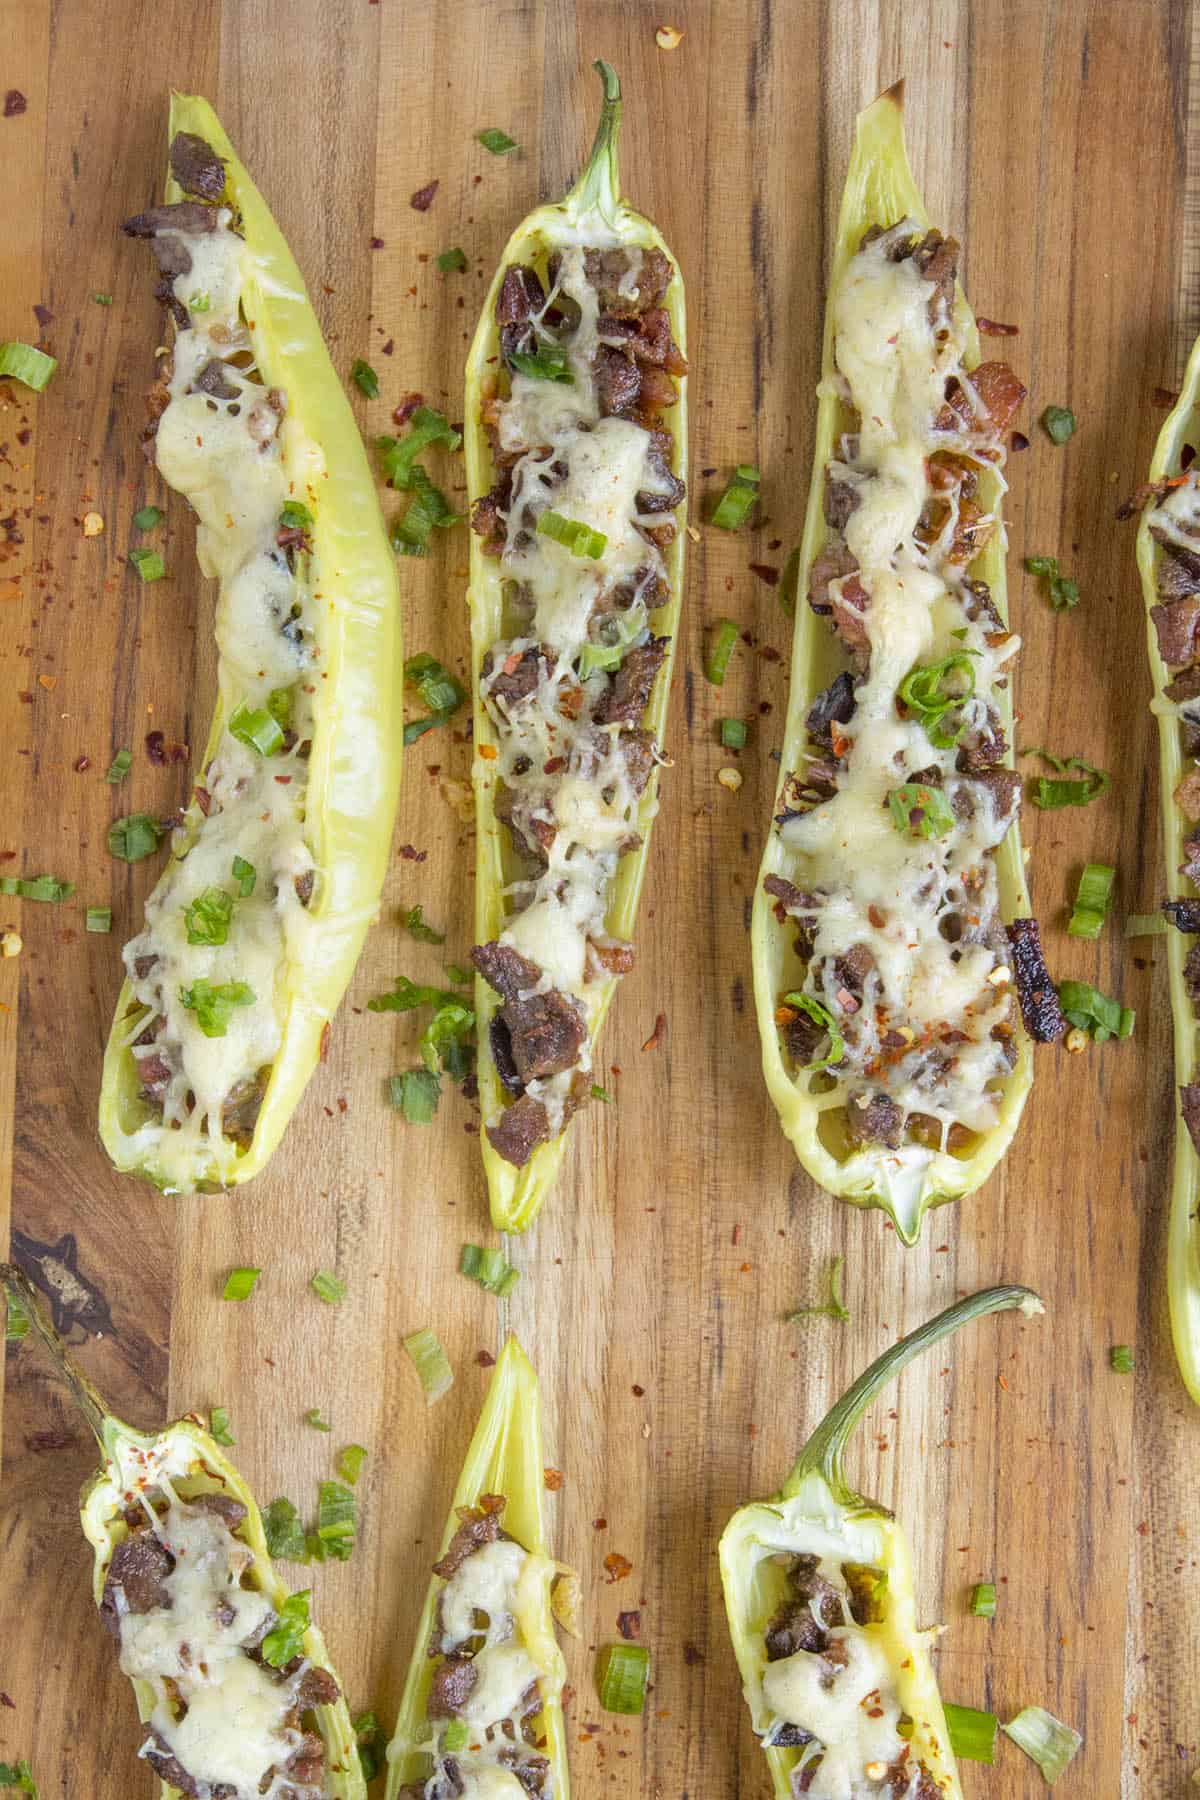 Stuffed Banana Peppers sprinkled with spicy chili flakes